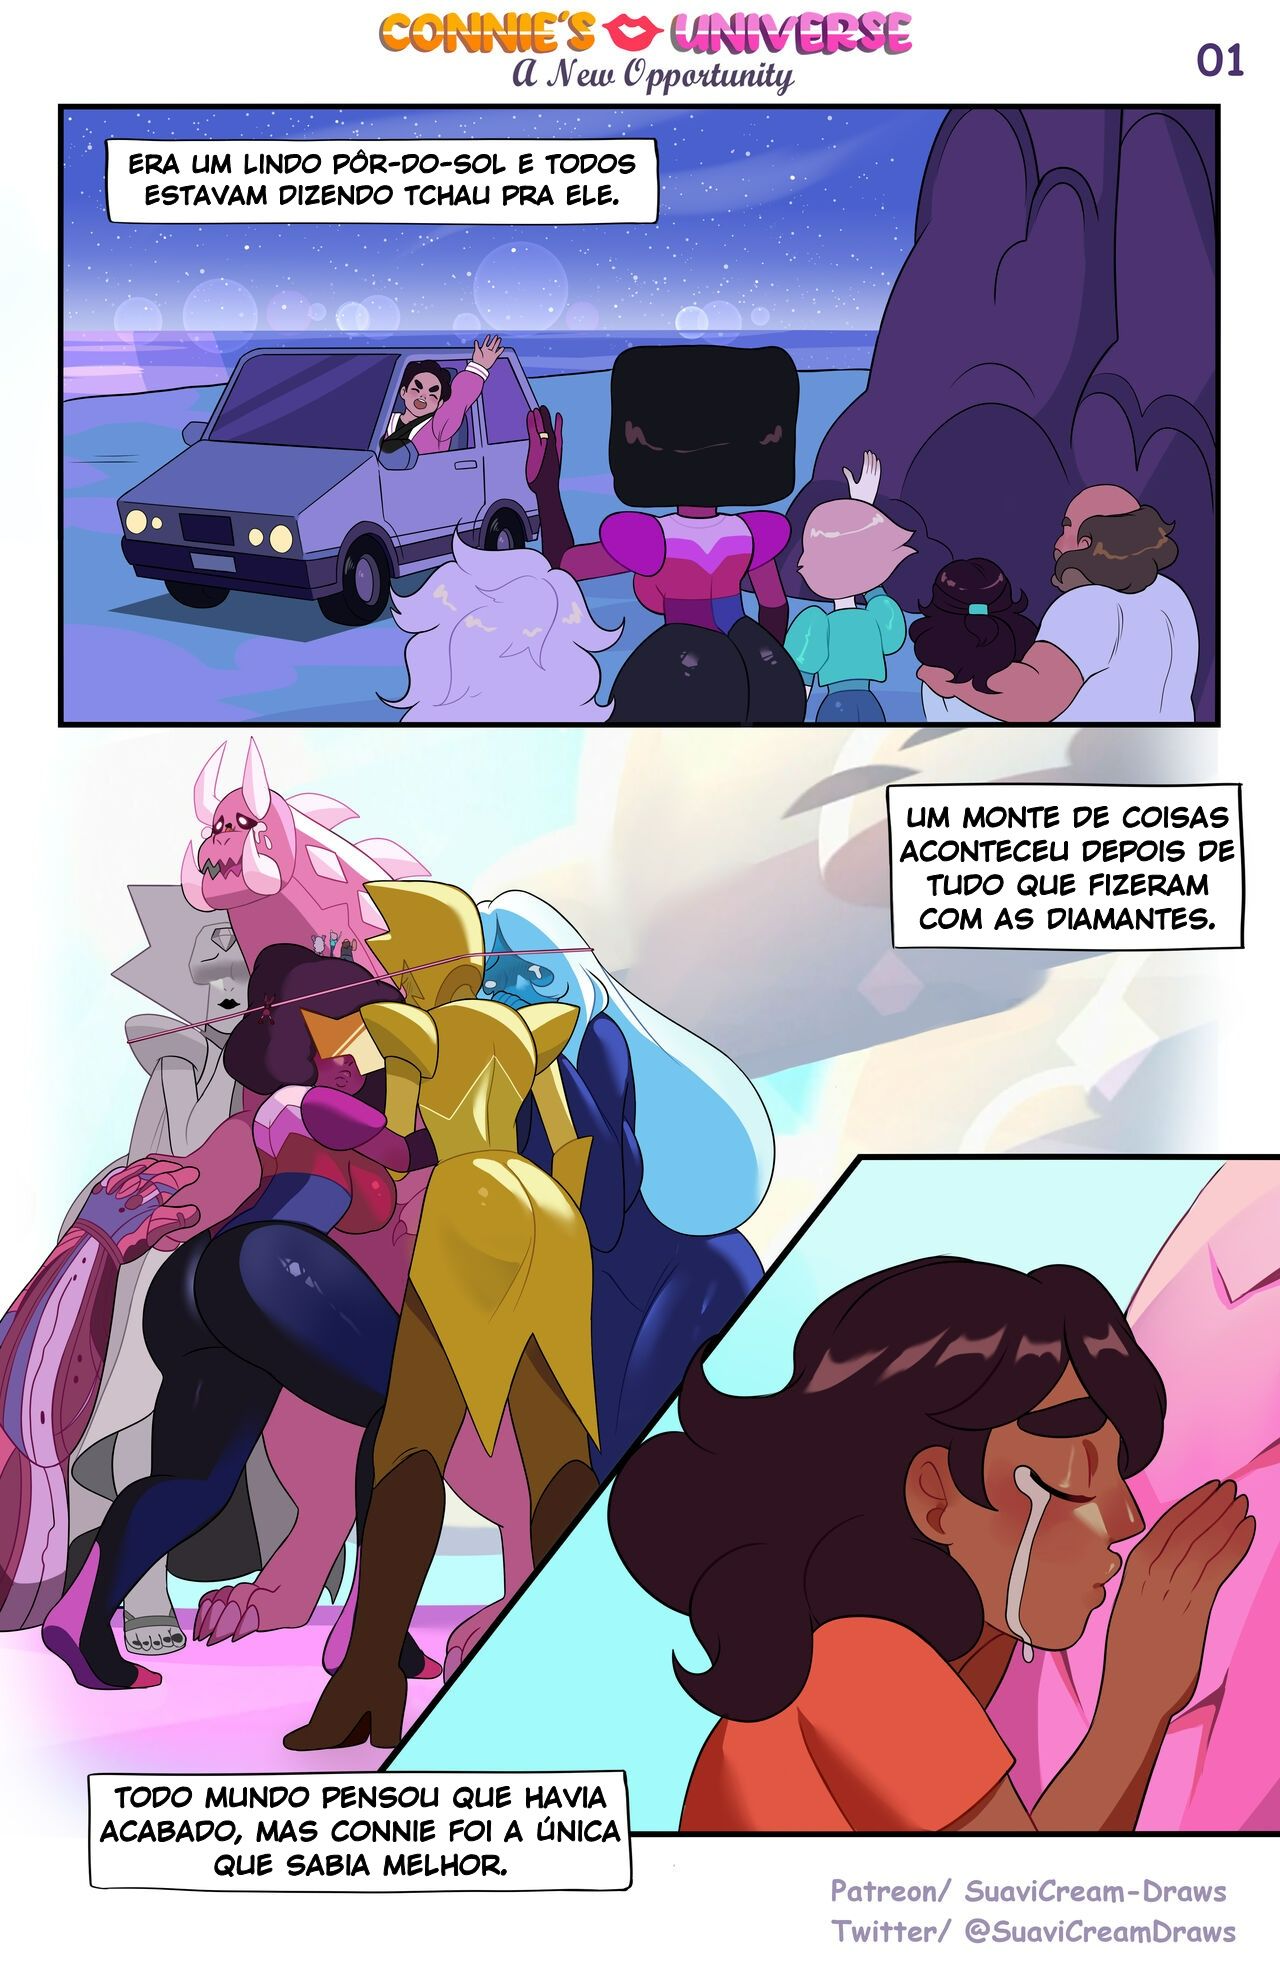 Connie’s universe: A new opportunity Hentai pt-br 02